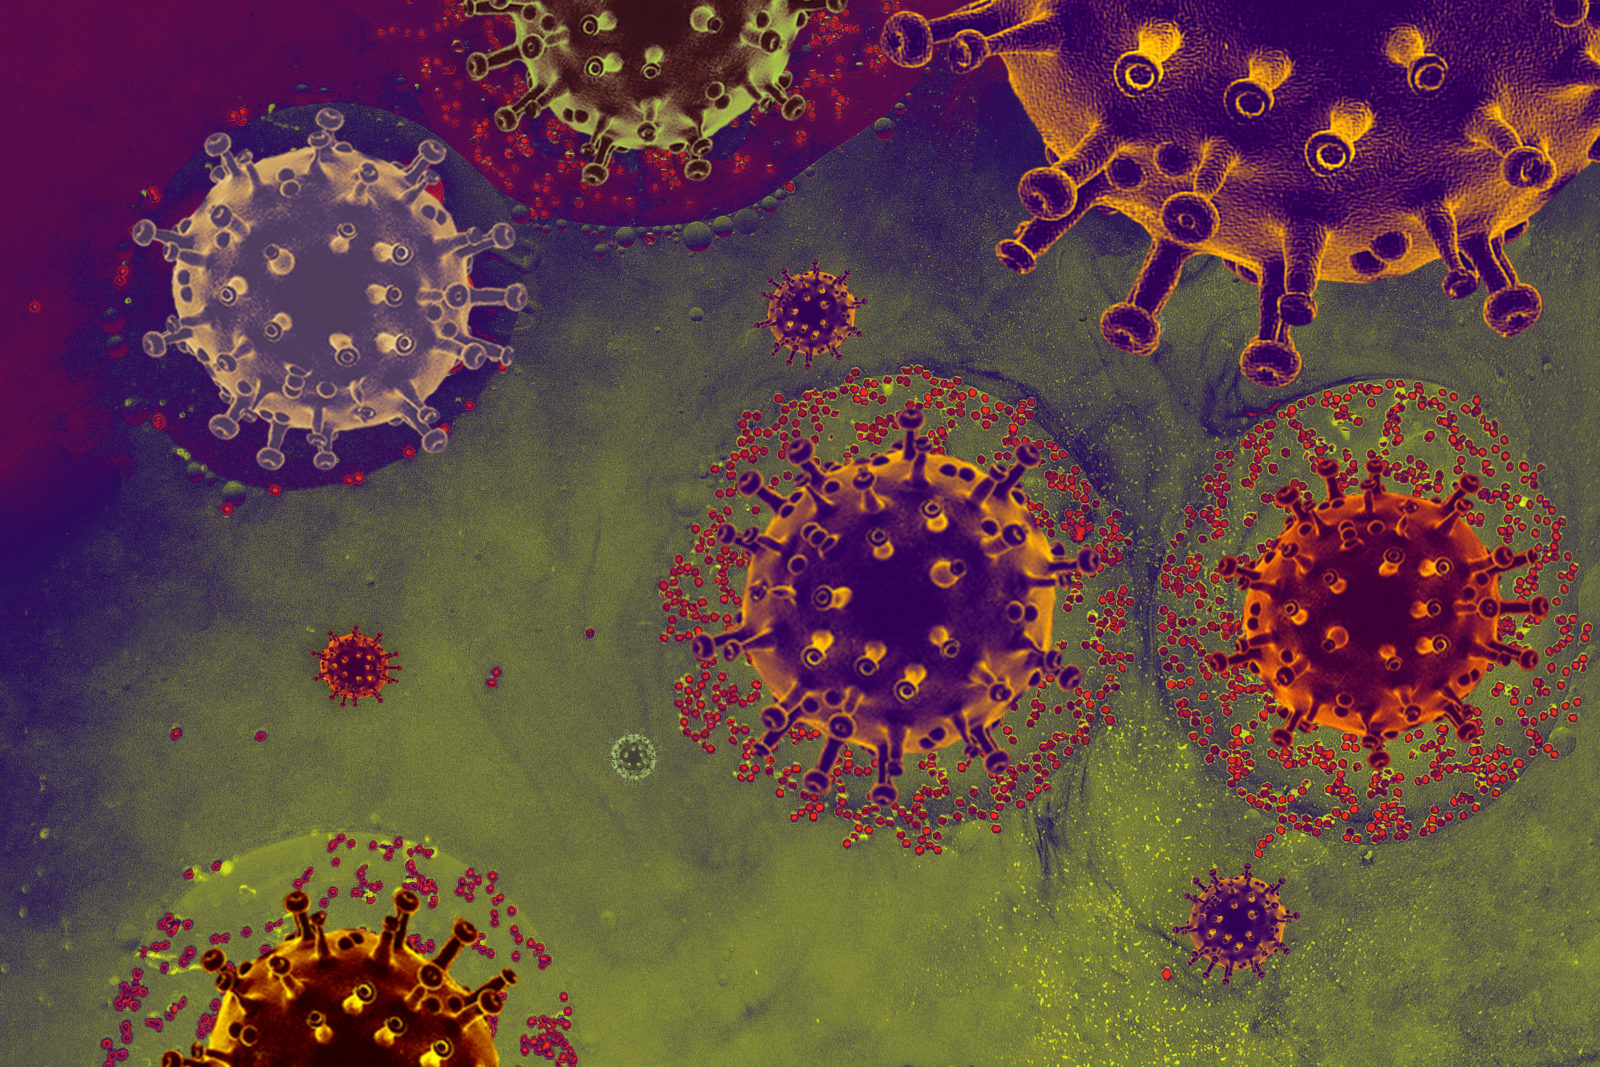 Rapid Substitution 43684686 view of a virus cells or bacteria molecule infectious disease concept